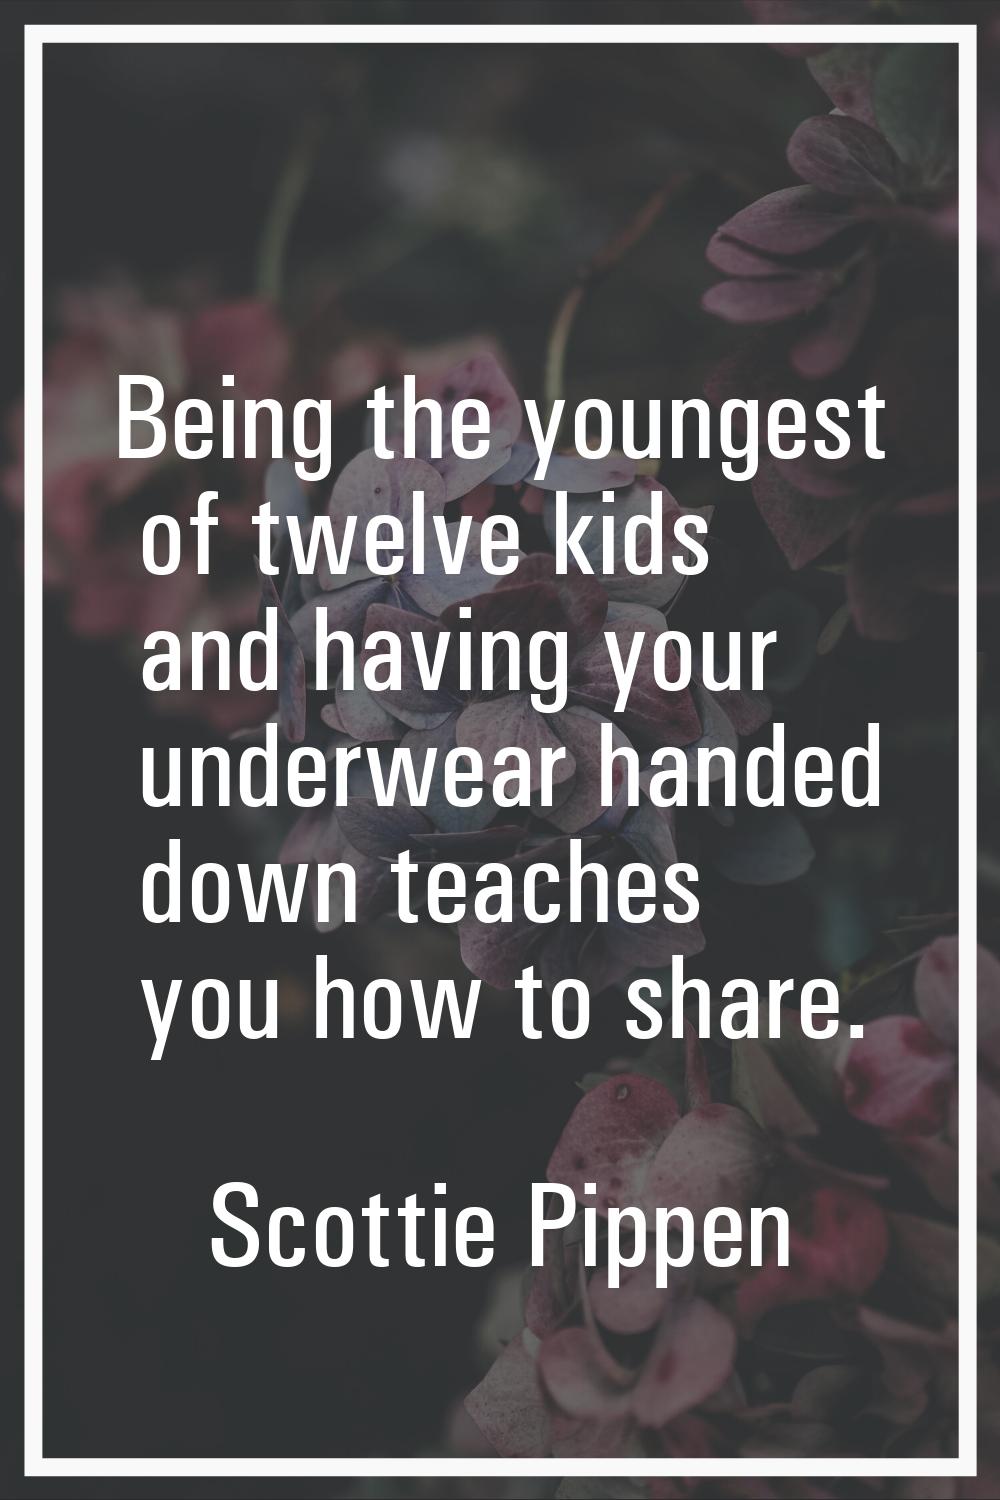 Being the youngest of twelve kids and having your underwear handed down teaches you how to share.